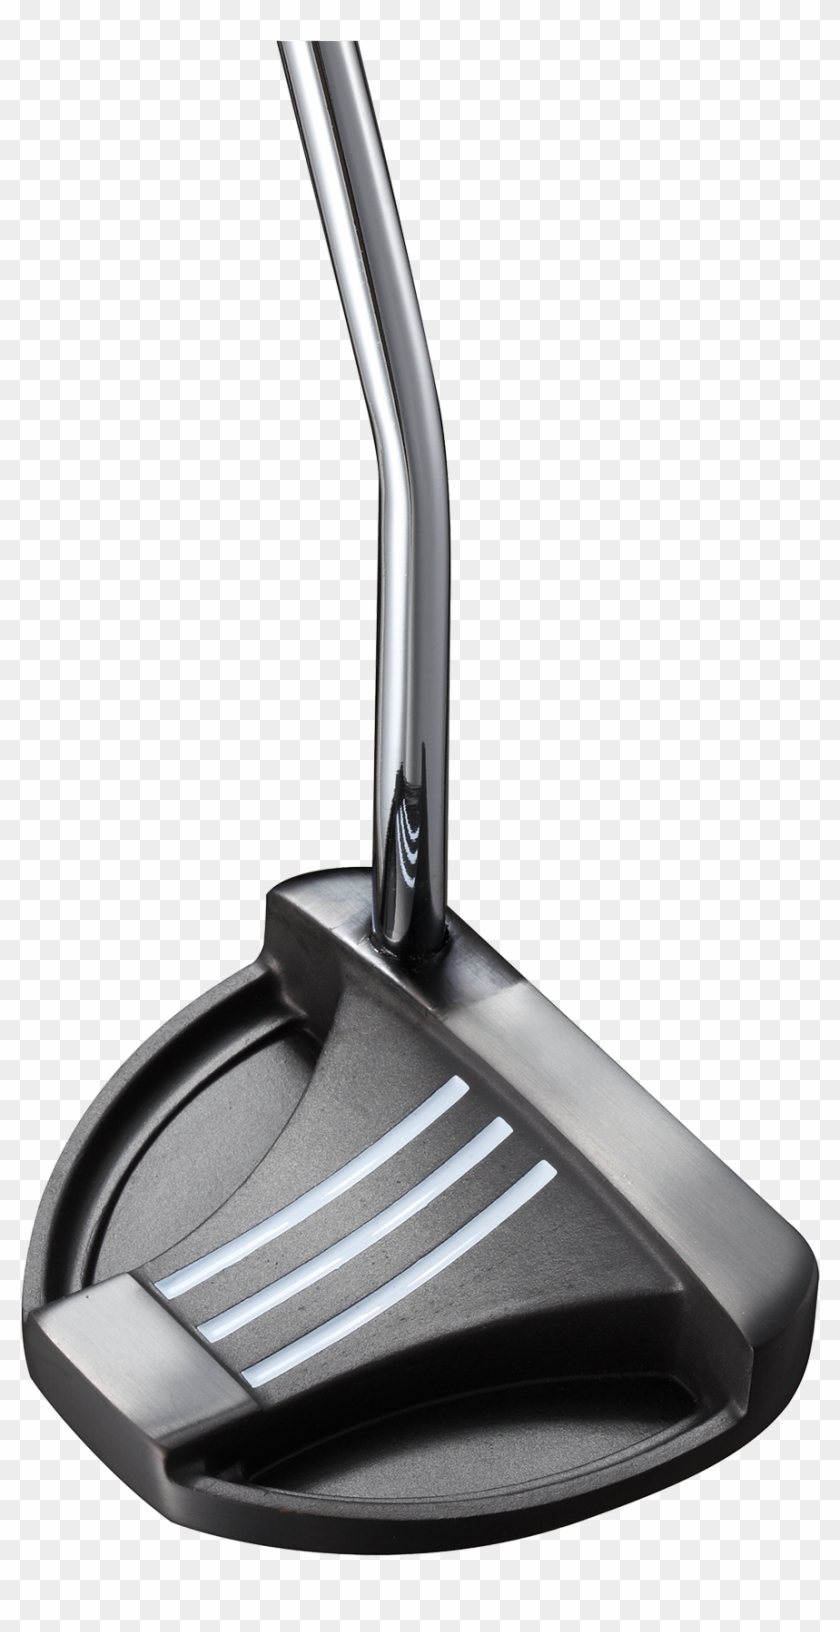 View All Putters - Putter #1688985